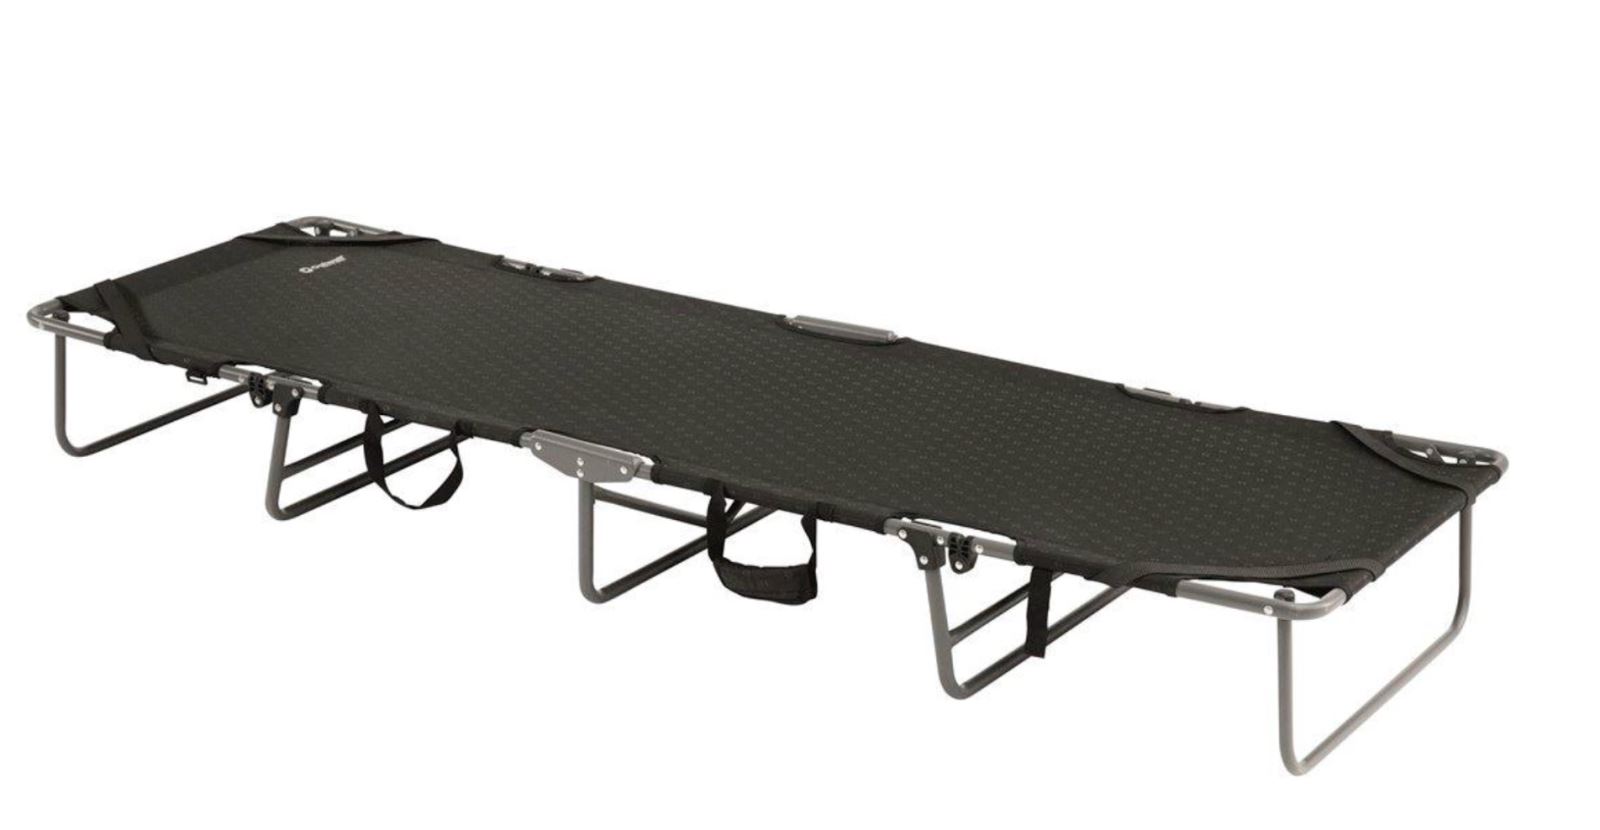 An Outwell tostado camping bed